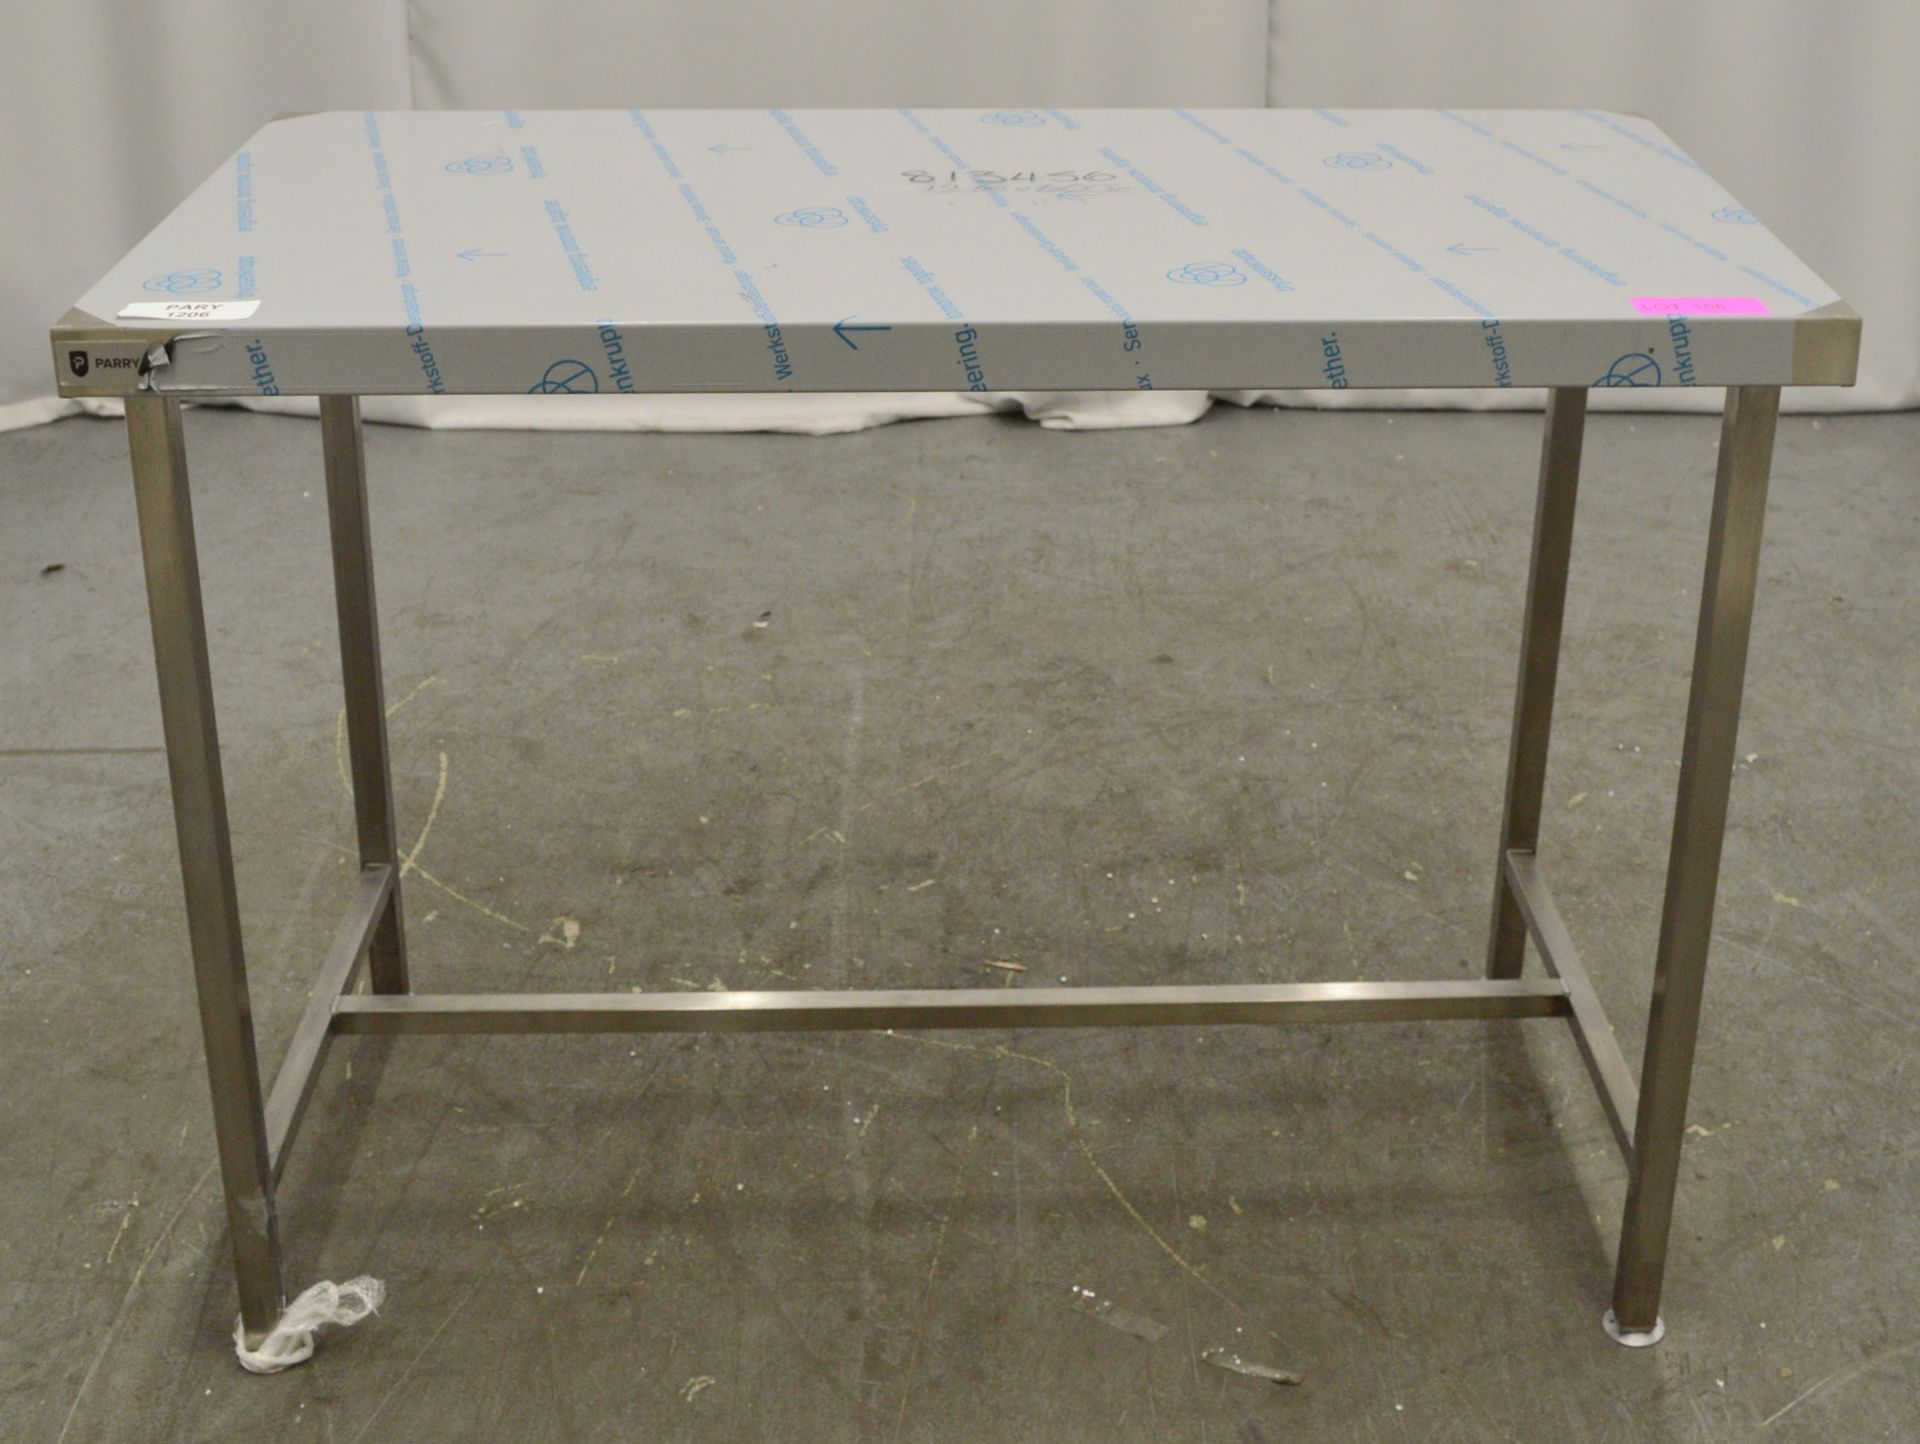 Parry stainless steel prep table 1200x900x900mm